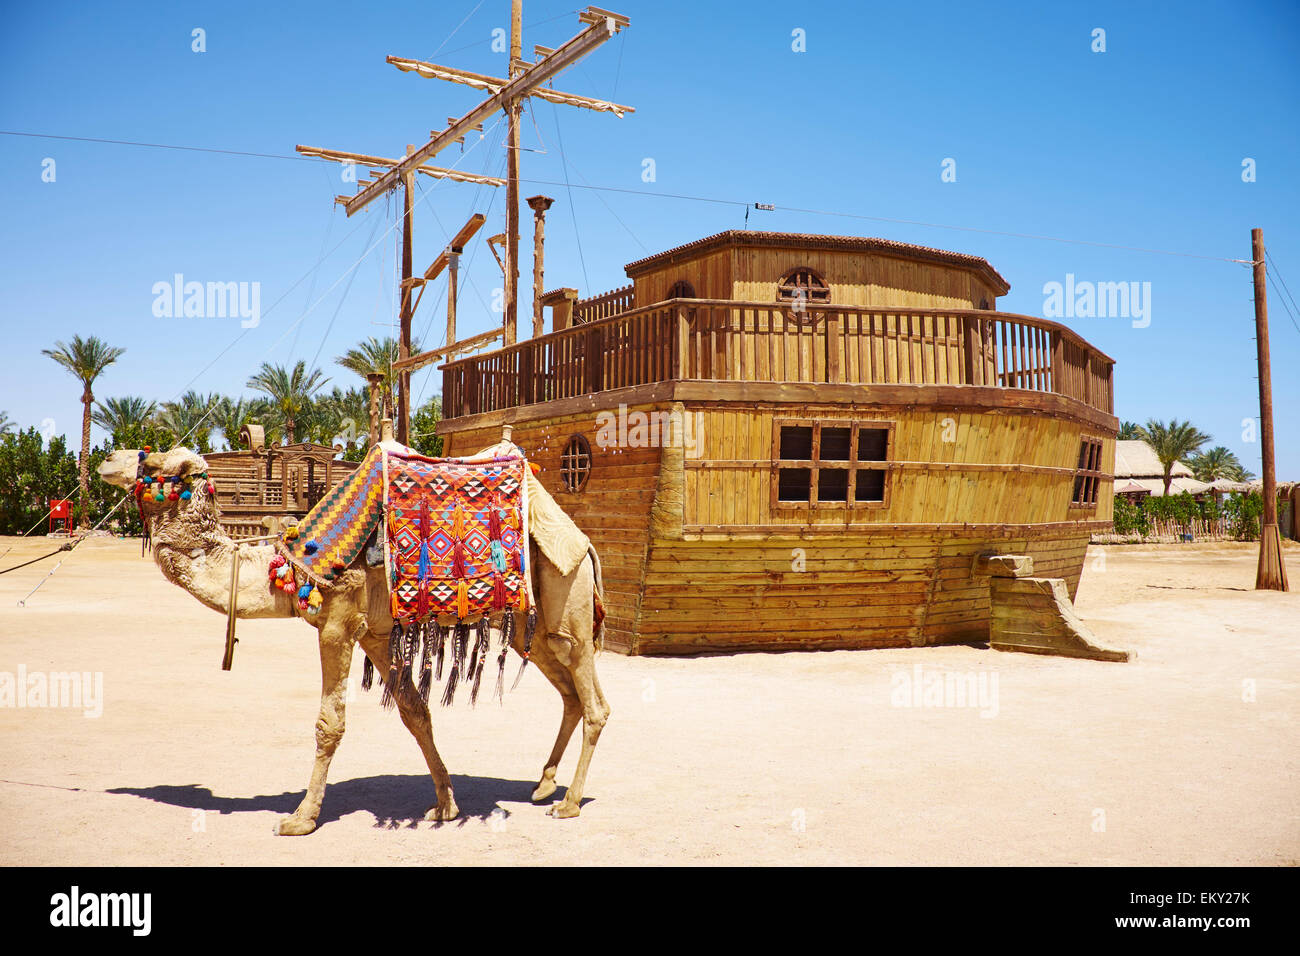 Camel Used For Tourists To Ride On Straits Of Tiran Red Sea Sharm El Sheikh Egypt Stock Photo